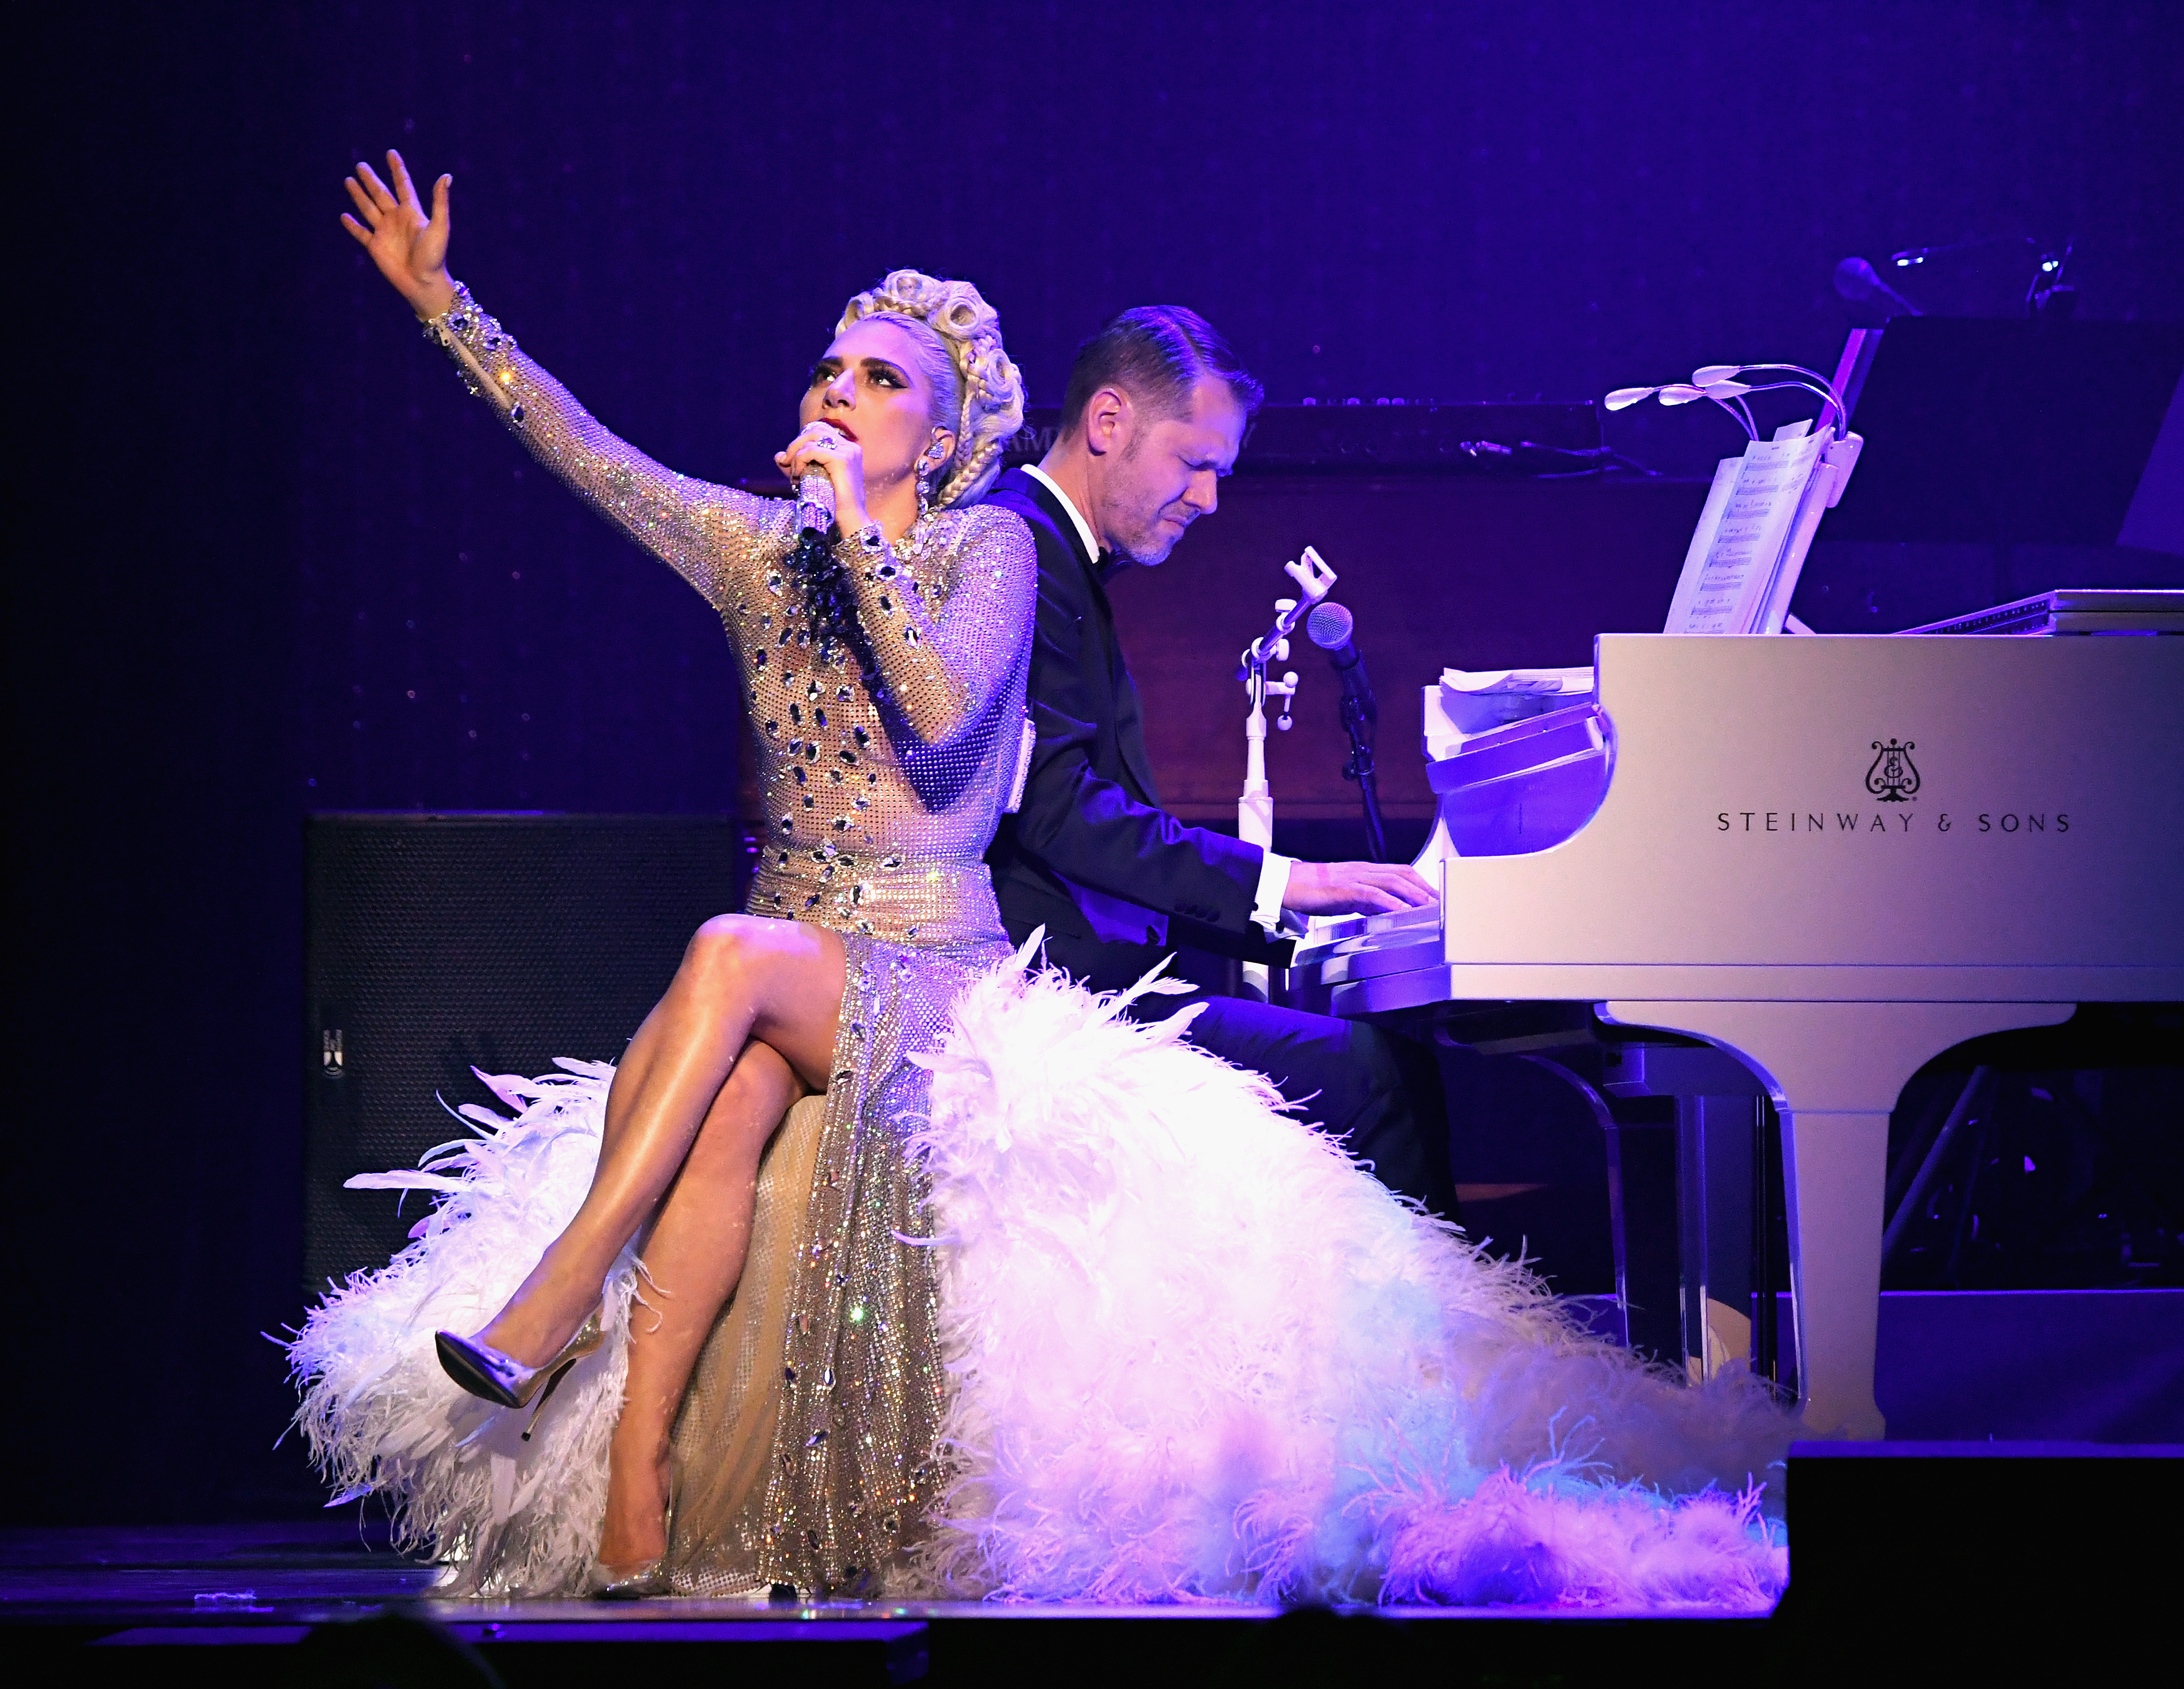 Lady Gaga, seen on stage in Las Vegas, has been busy with her residency, Jazz & Piano